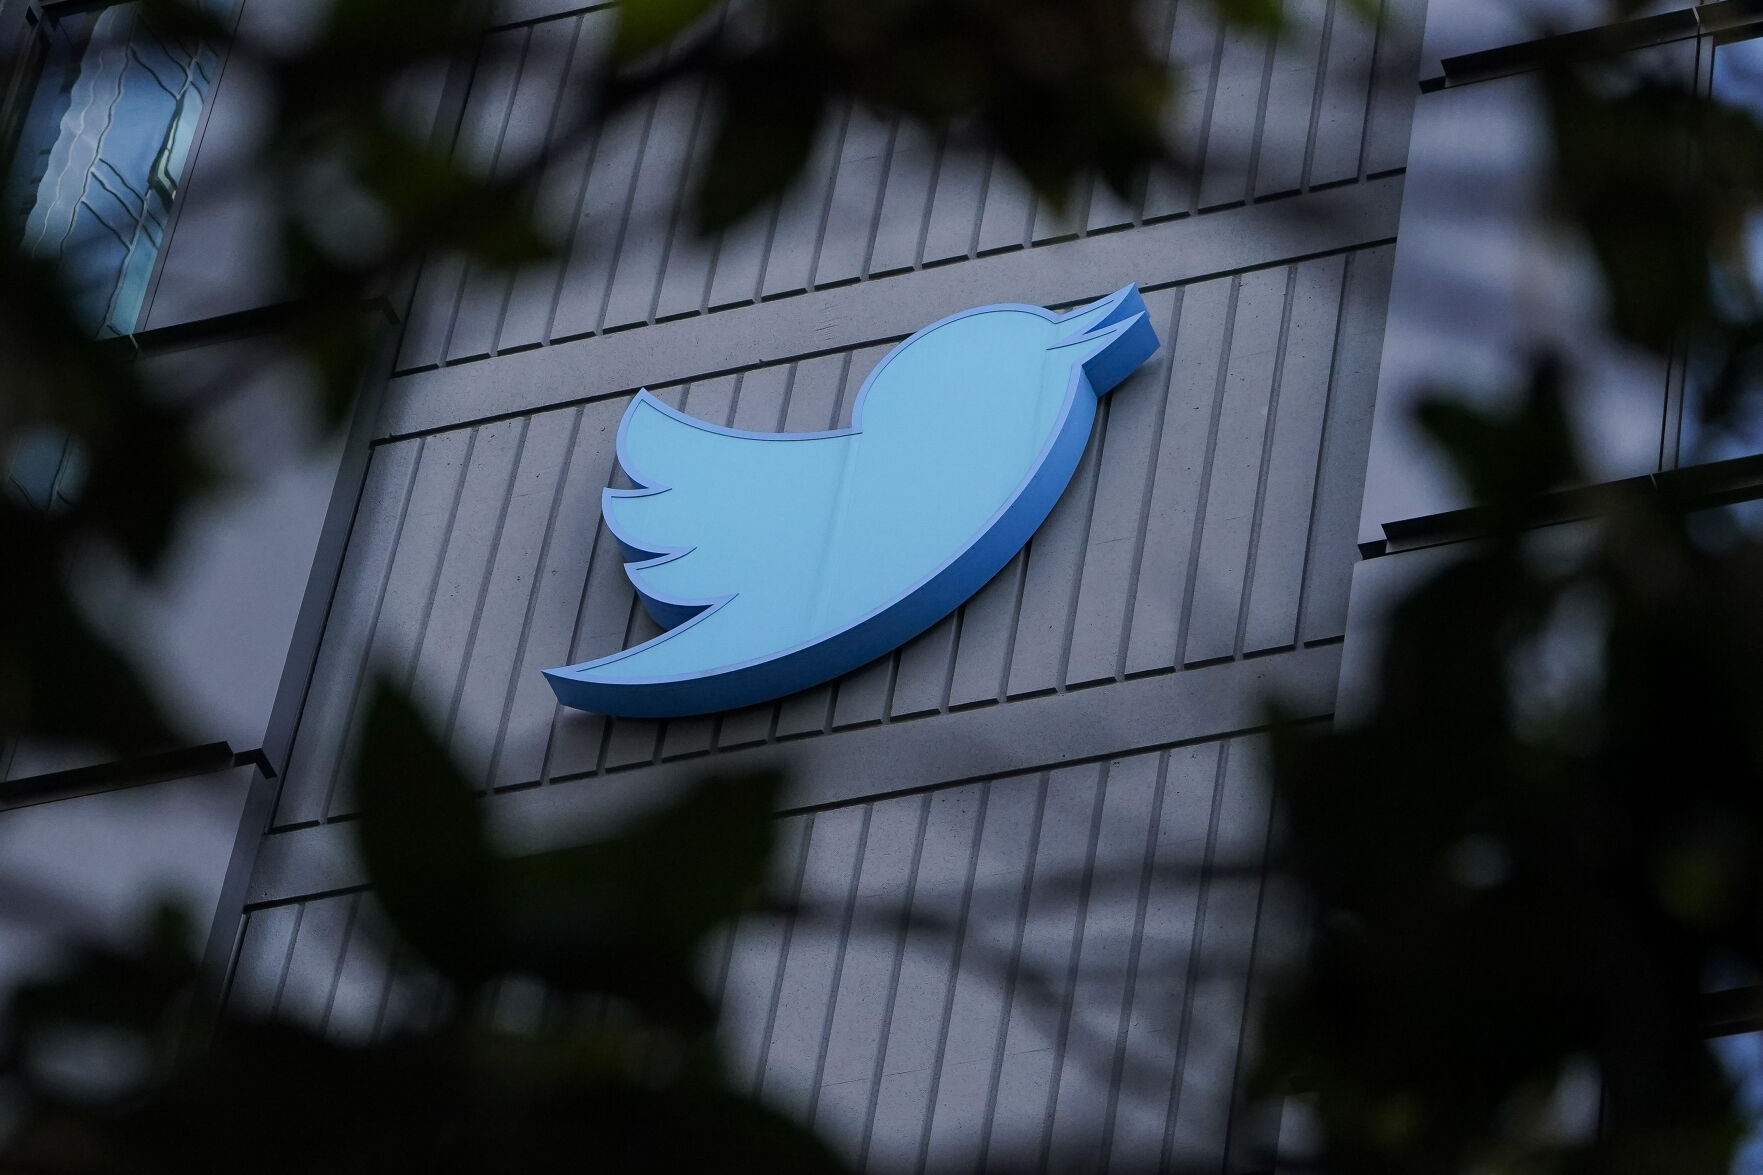 <p>A sign is pictured outside the Twitter headquarters in San Francisco, Wednesday, Oct. 26, 2022. A court has given Elon Musk until Friday to close his April agreement to acquire the company after he earlier tried to back out of the deal. (AP Photo/Godofredo A. Vásquez)</p>   PHOTO CREDIT: Godofredo A. Vásquez - staff, AP